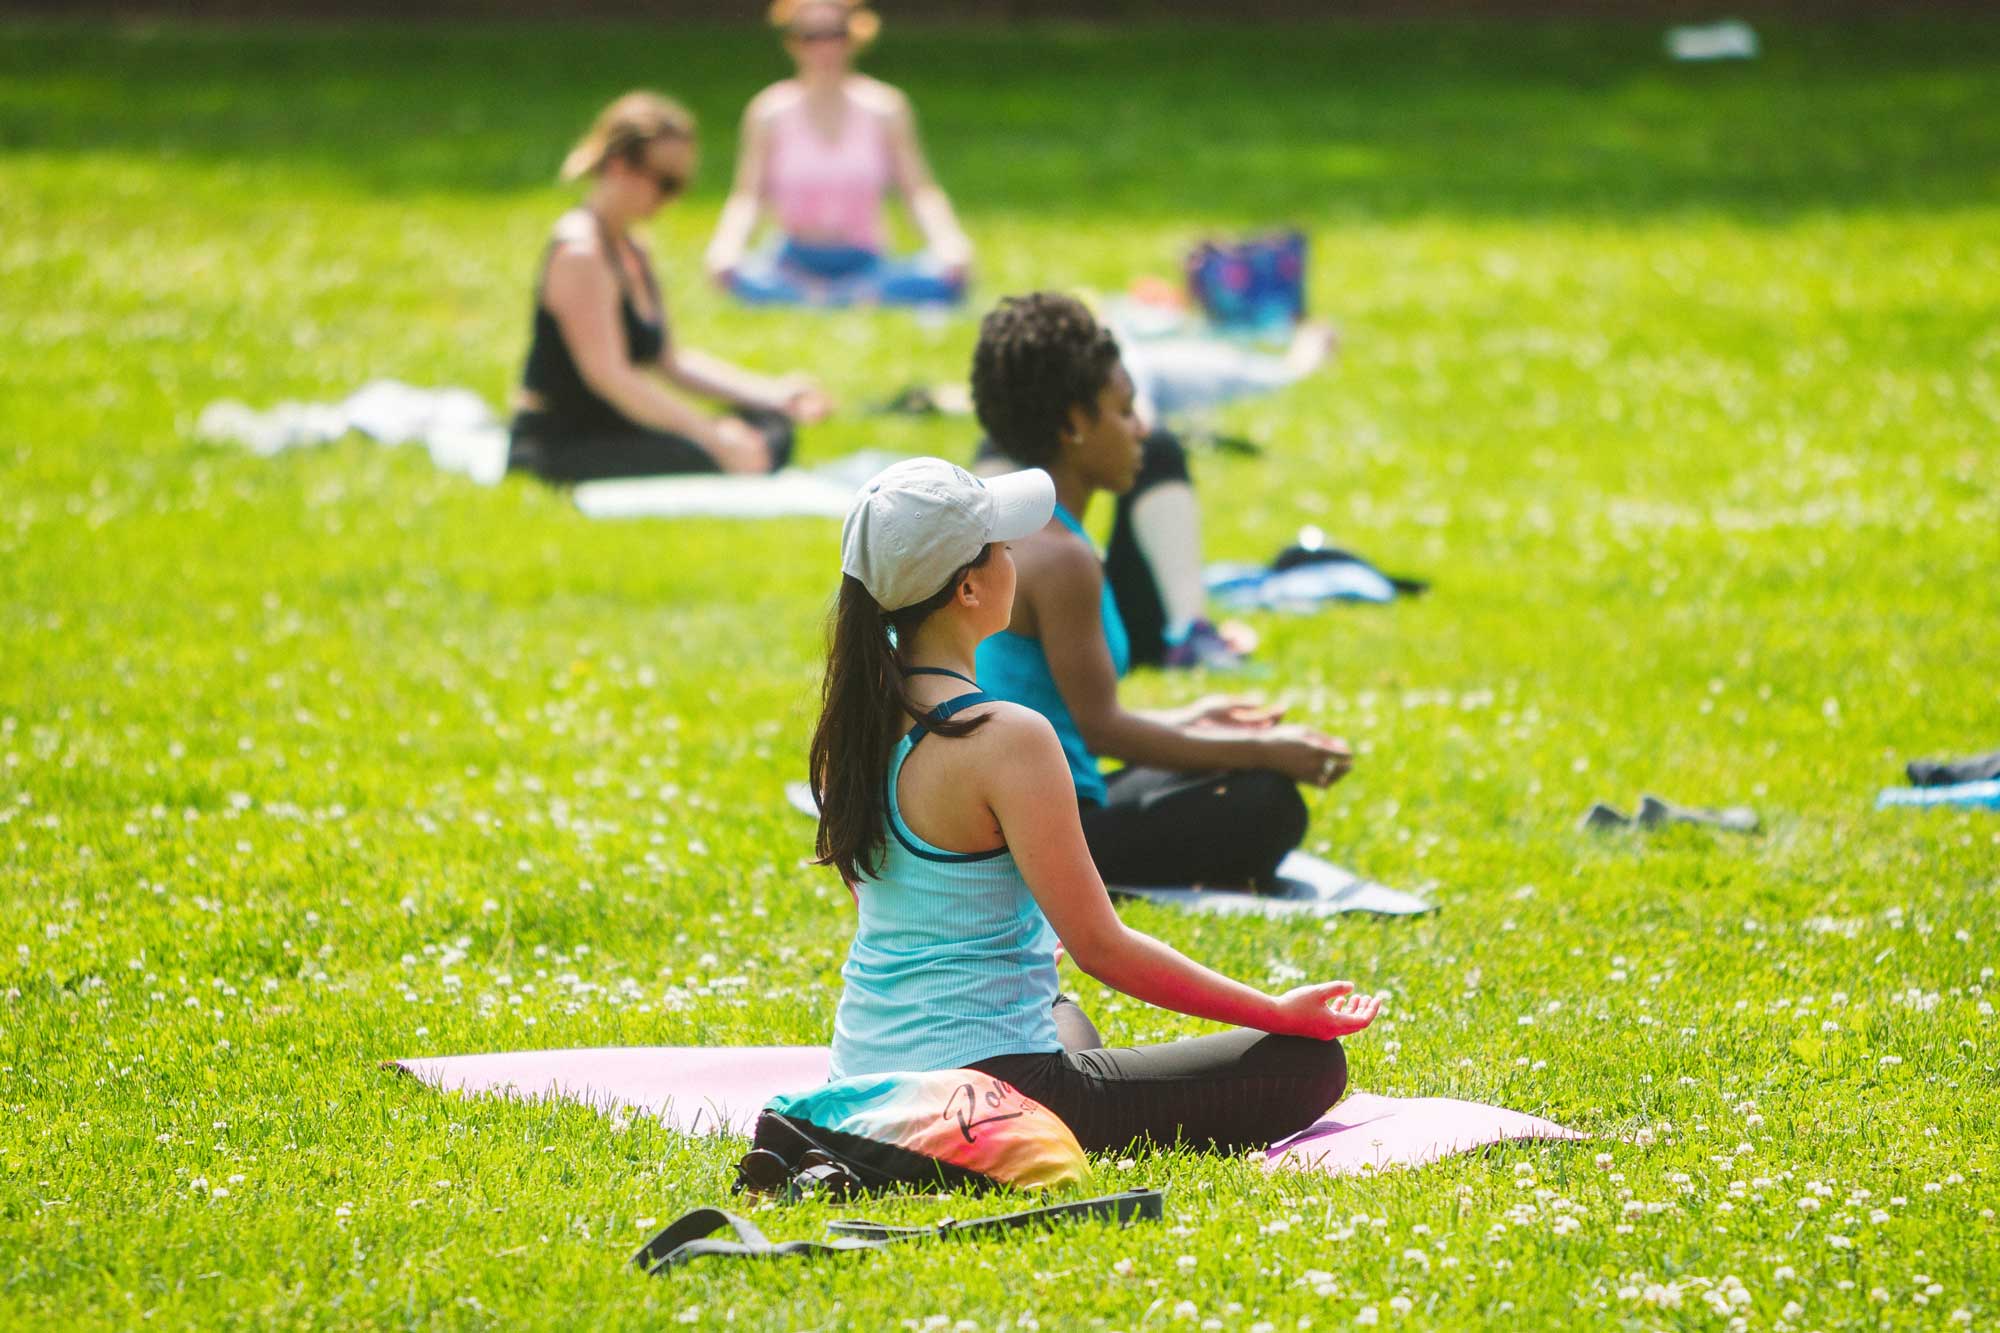 People do yoga outside in a grassy area.